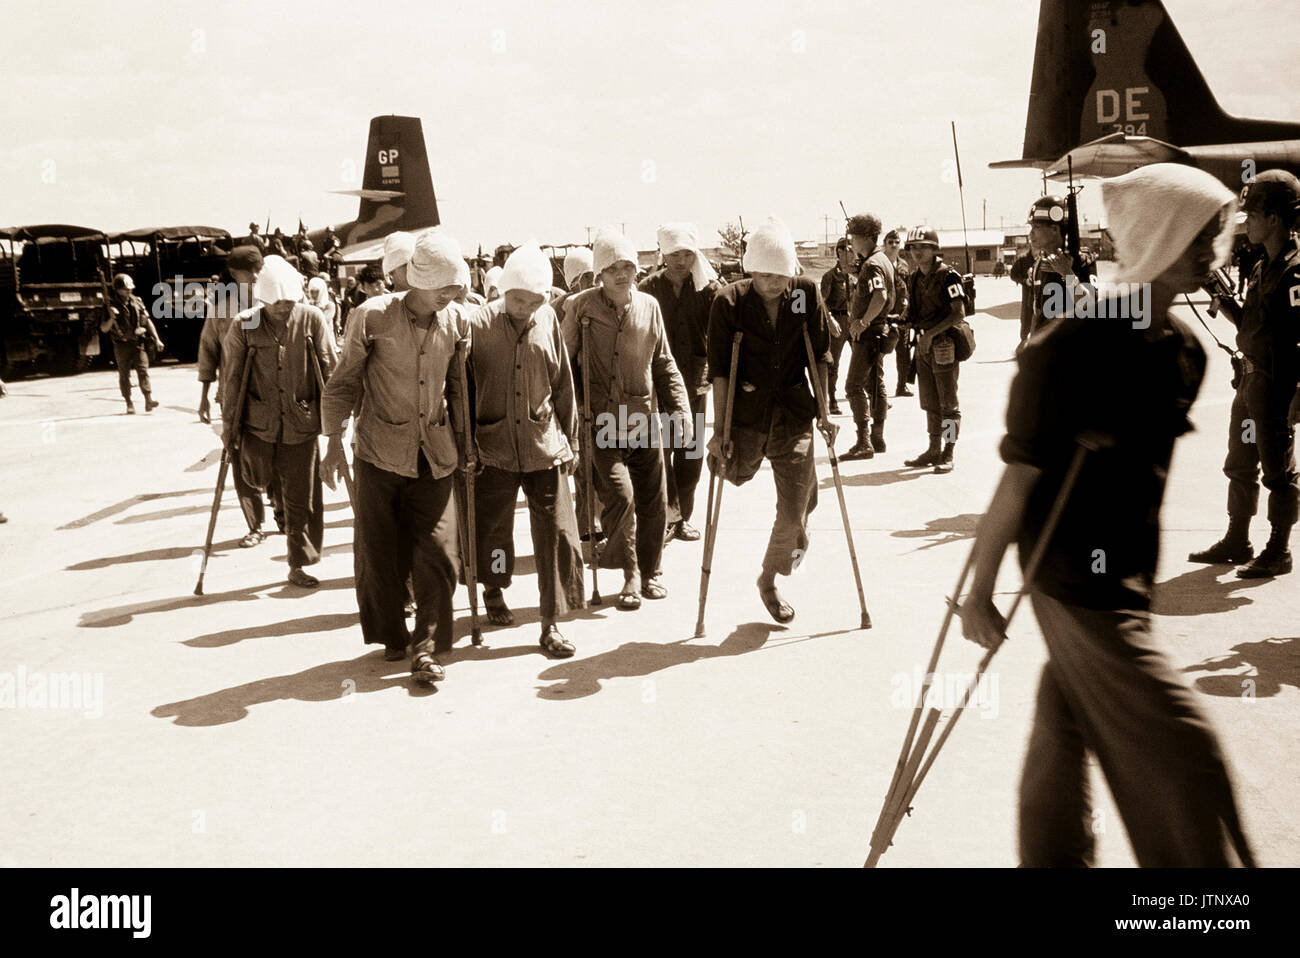 Viet Cong POWs, some on crutches, under the watchful eyes of South Vietnamese military police walk to the waiting C-123 transport aircraft.  The POWS will be airlifted to Loc Ninh, South Vietnam for the prisoner exchange between the United States/South Vietnam and North Vietnam/Viet Cong militaries. Stock Photo